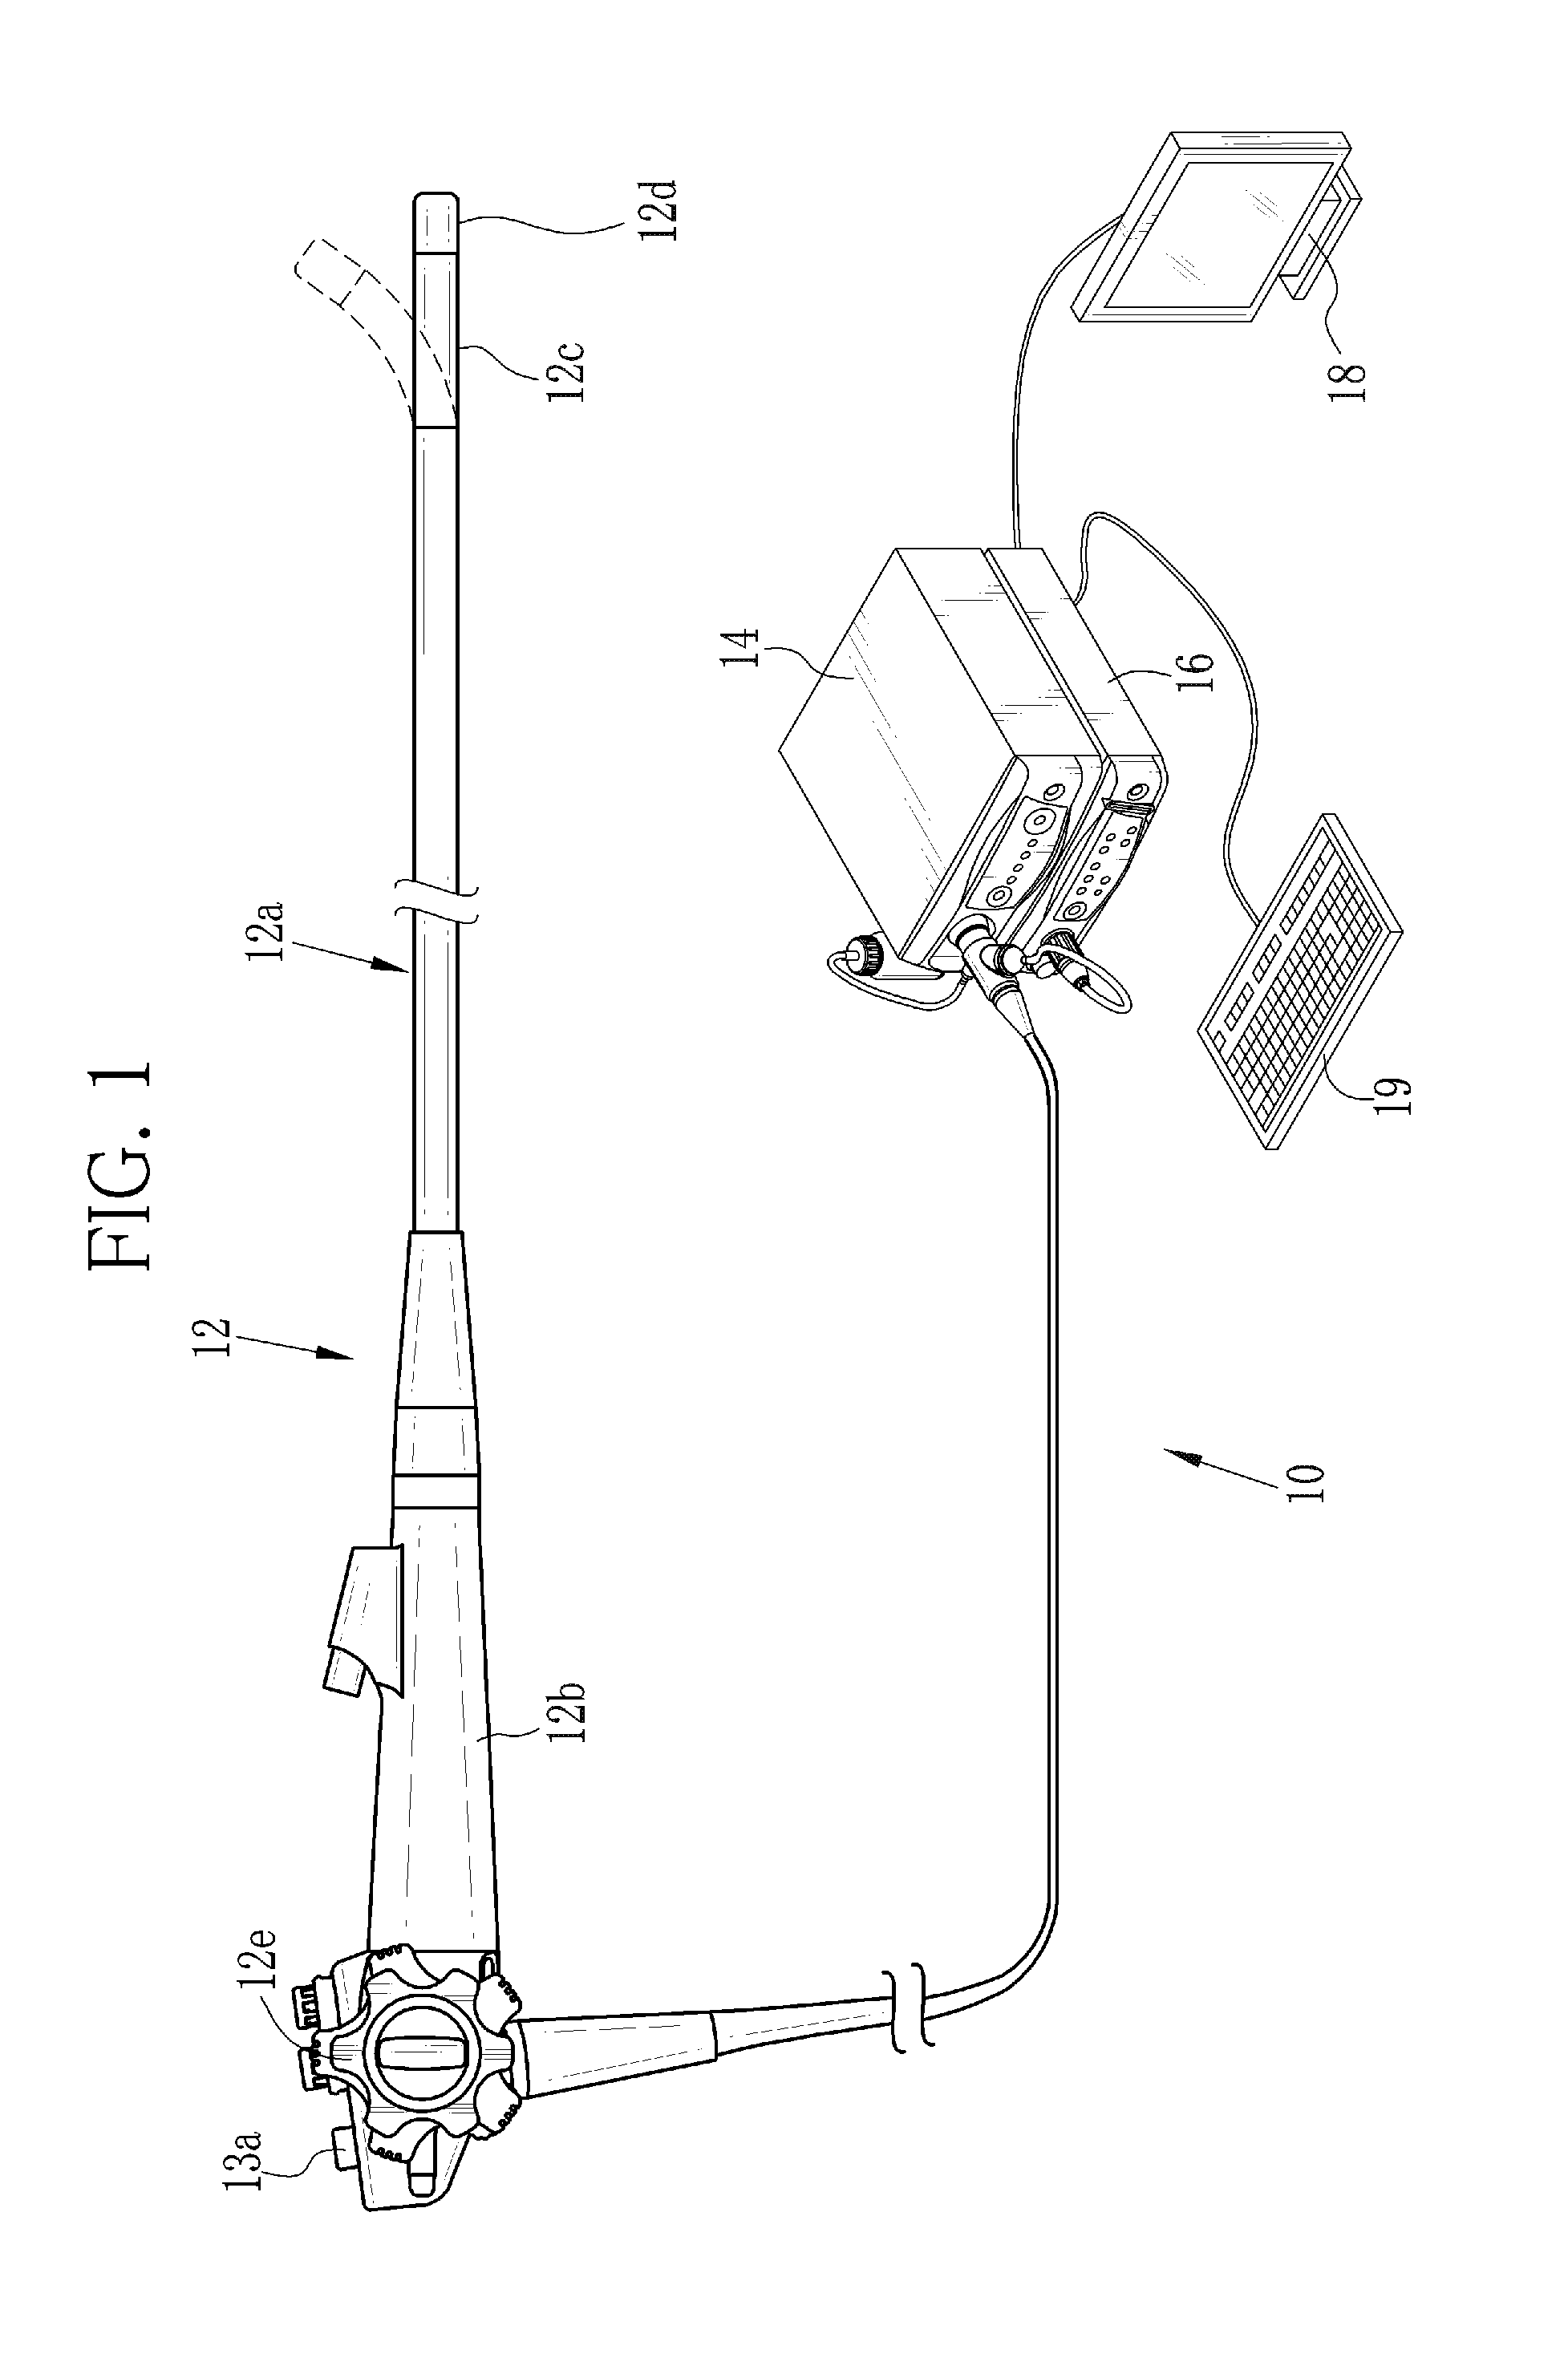 Medical image processing device, method for operating the same, and endoscope system